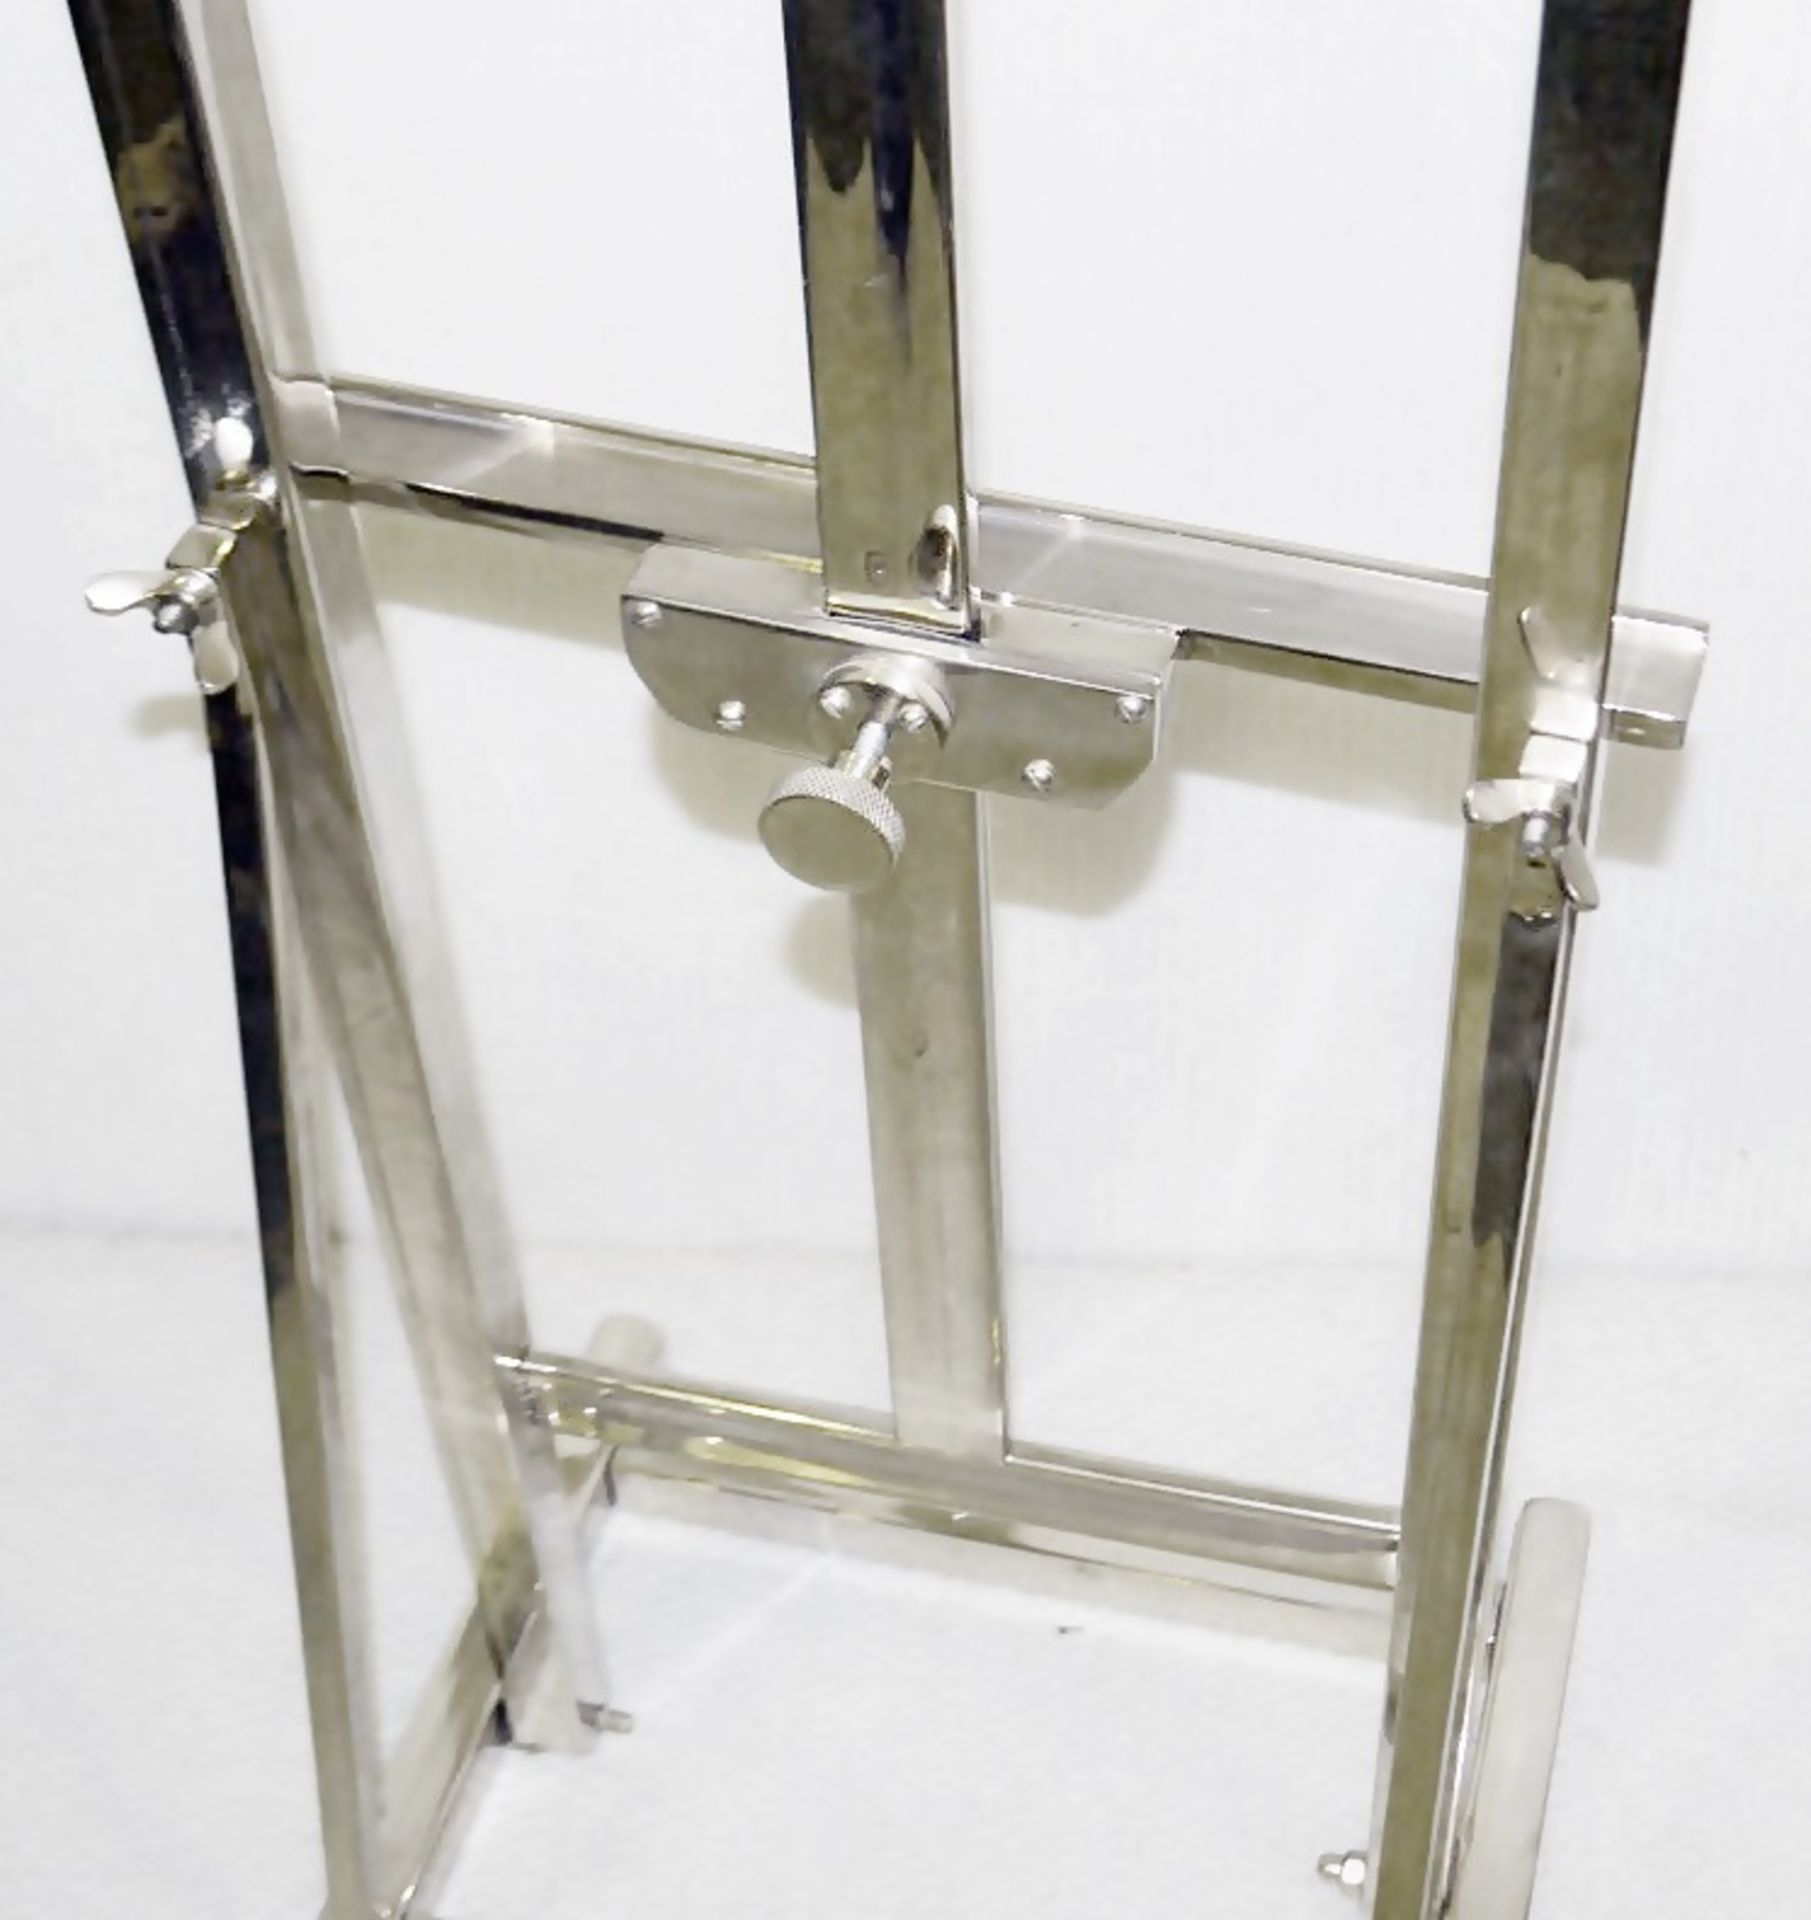 1 x Premium Decorative Display Metal Easel With A Nickel Finish - Ex-Display - Image 4 of 4